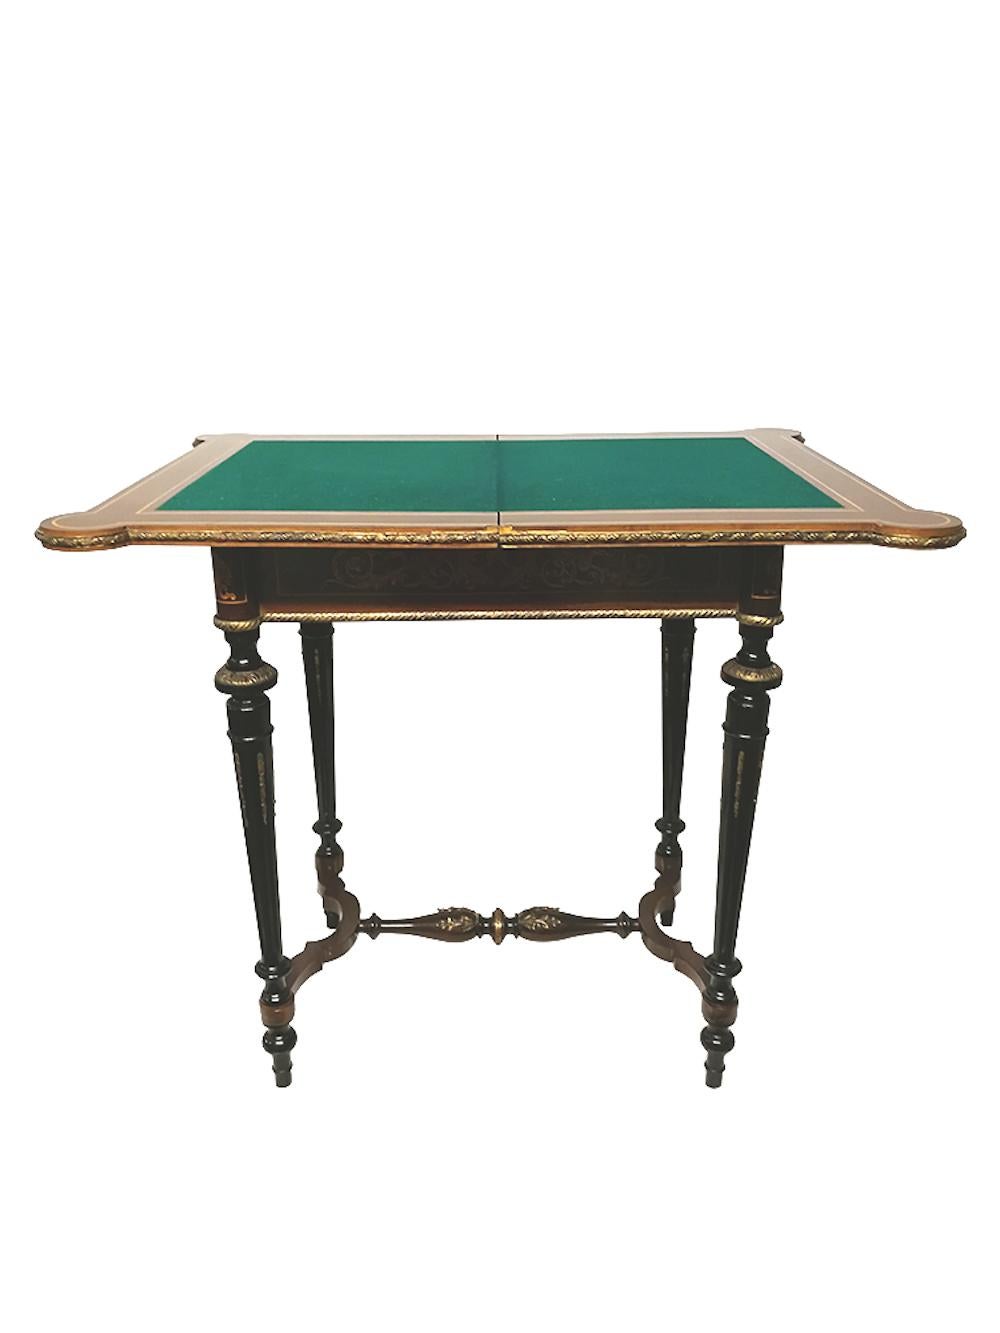 19th Napoleon III console marquetry game table with folding and rotating tabletop with inlaid foliage decoration of acanthus leaves, griffins, mascarons and snakes, ebonized legs and gilded bronze decorations on legs and tabletop edge. Green felt on